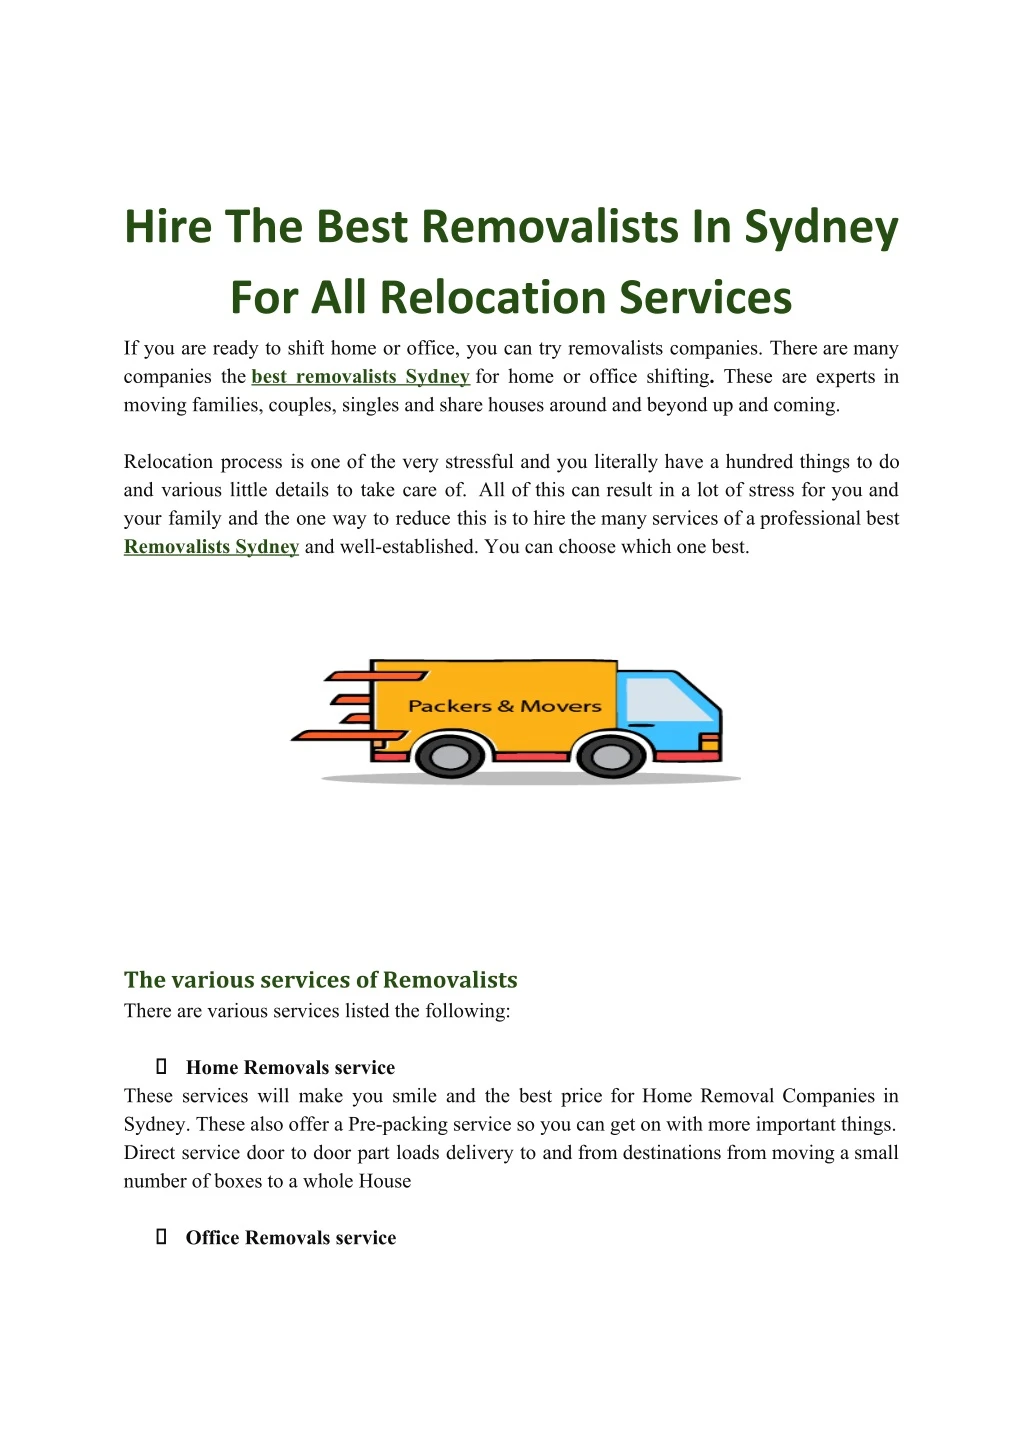 hire the best removalists in sydney